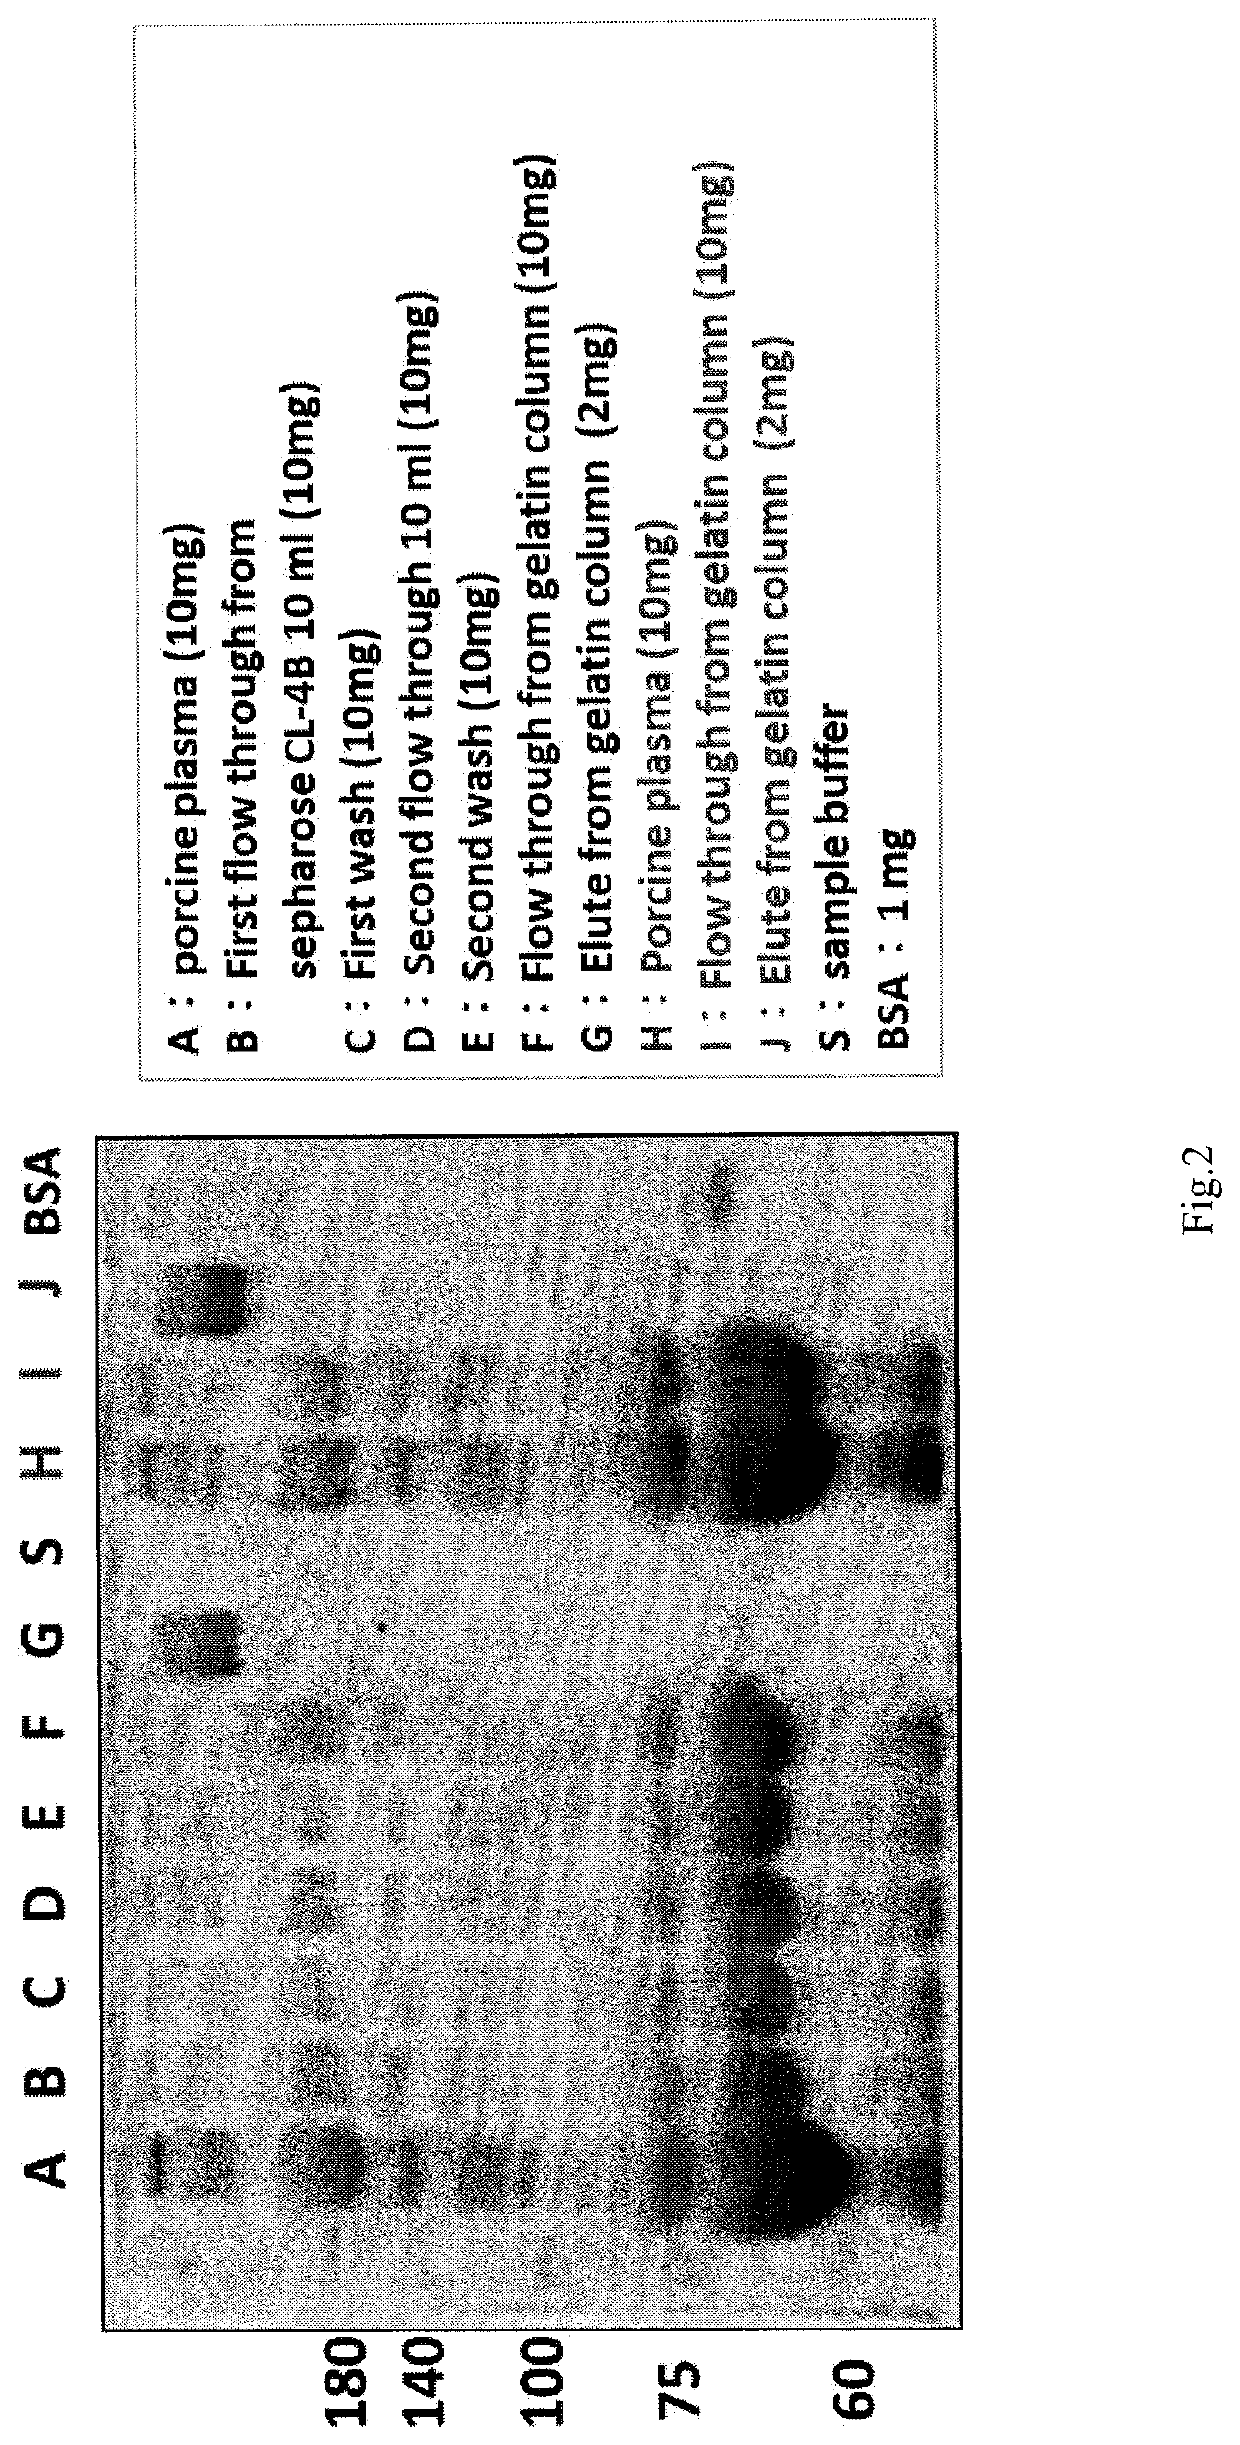 Process for a preparation of the modified porcine plasma fibronectin for enhance wound healing